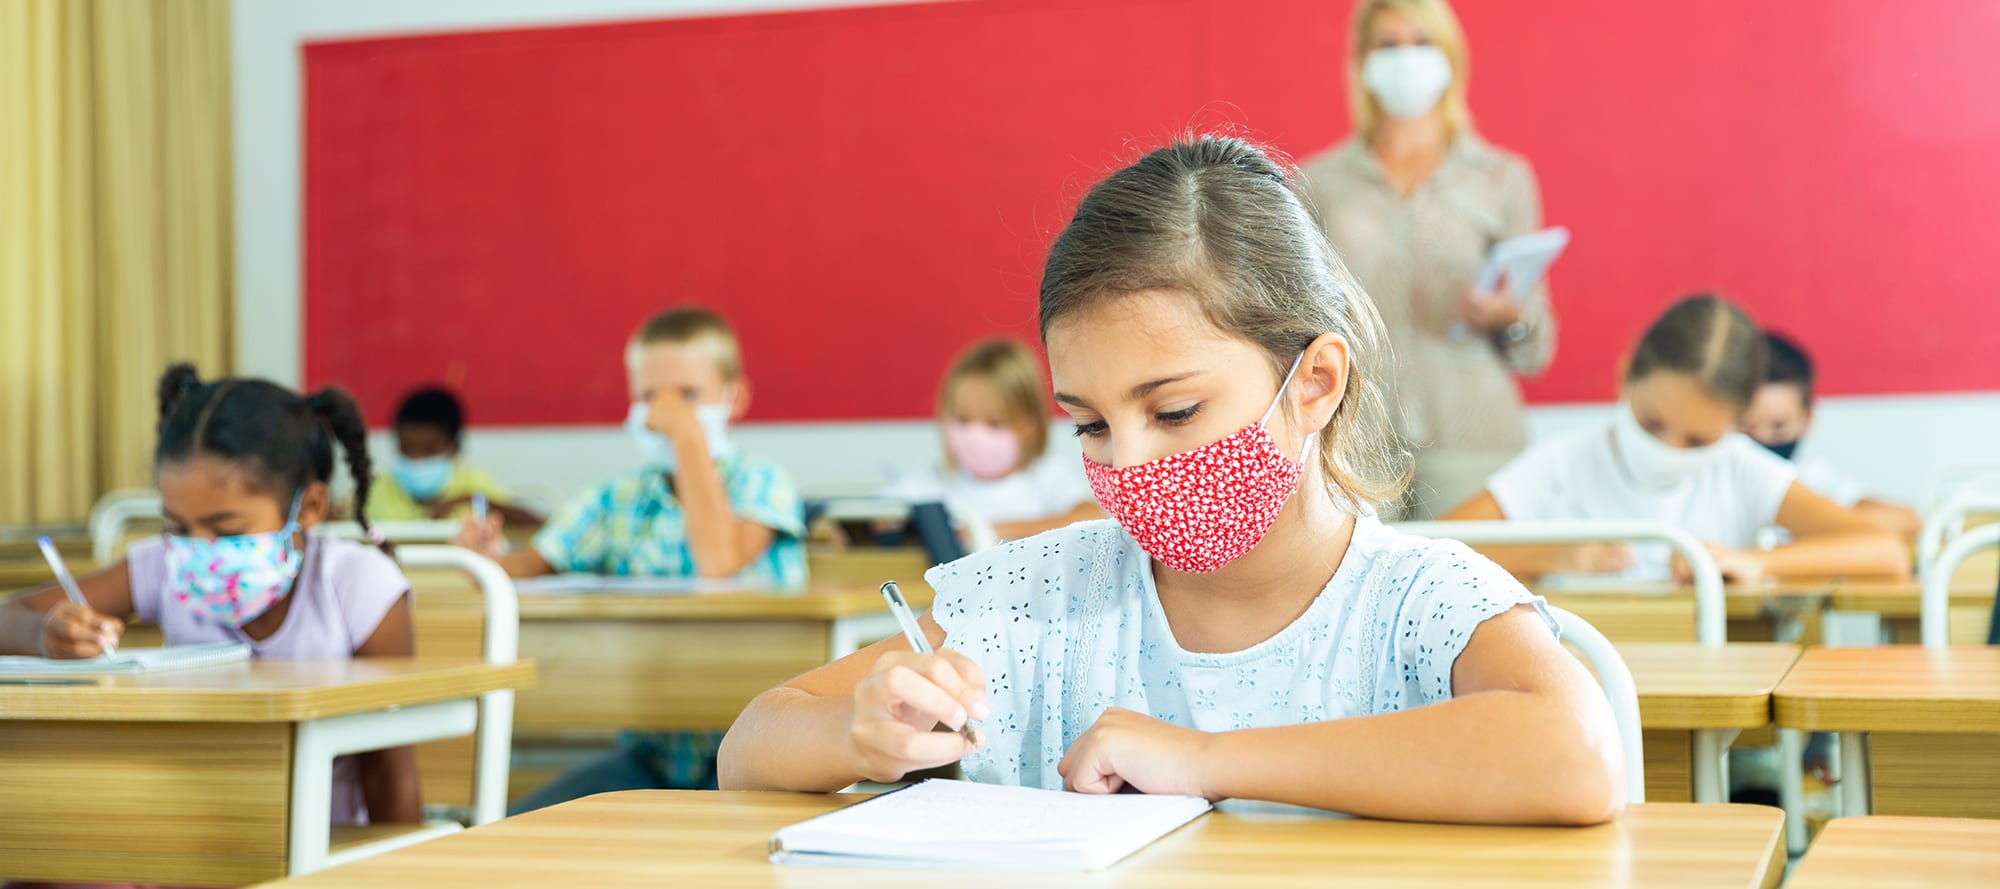 Child with medical mask sitting in classroom with classmates and teacher